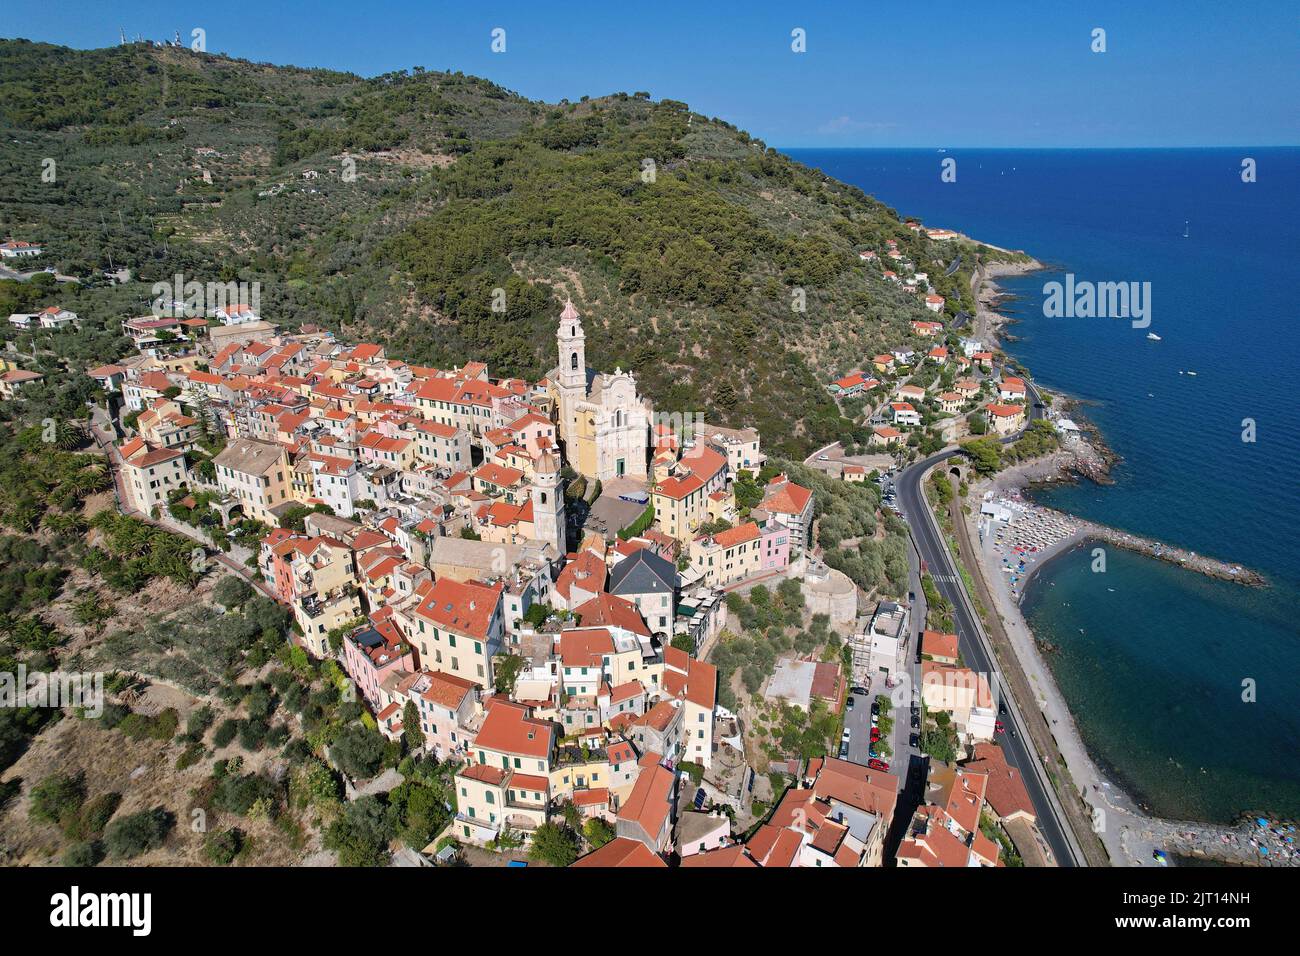 Aerial view of the village of Cervo on the Italian Riviera in the province of Imperia, Liguria, Italy. Stock Photo